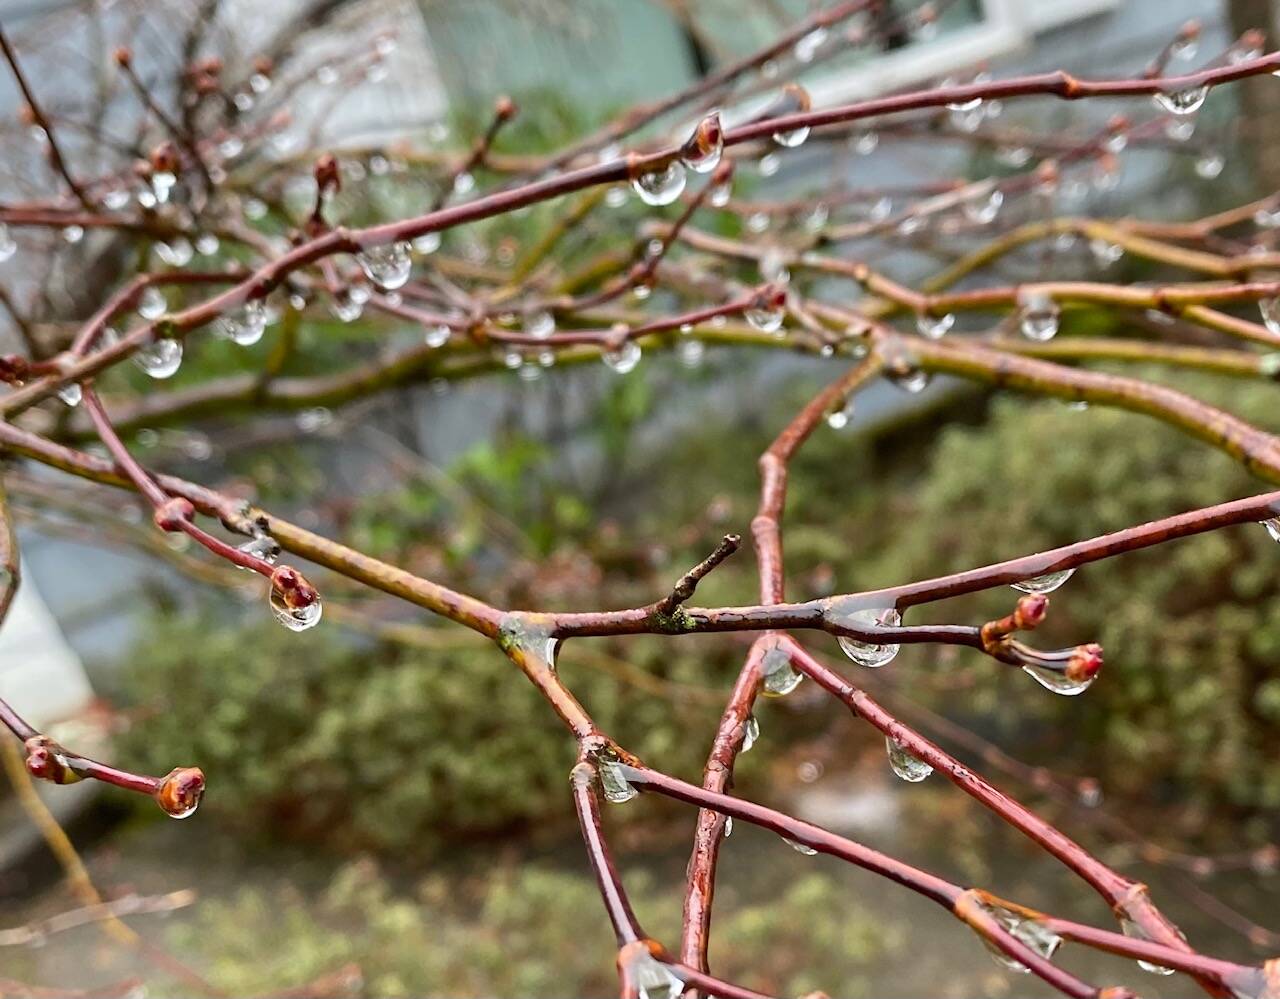 Frozen raindrops cling to bare branches in the downtown flats. (Courtesy Photo / Denise Carroll)